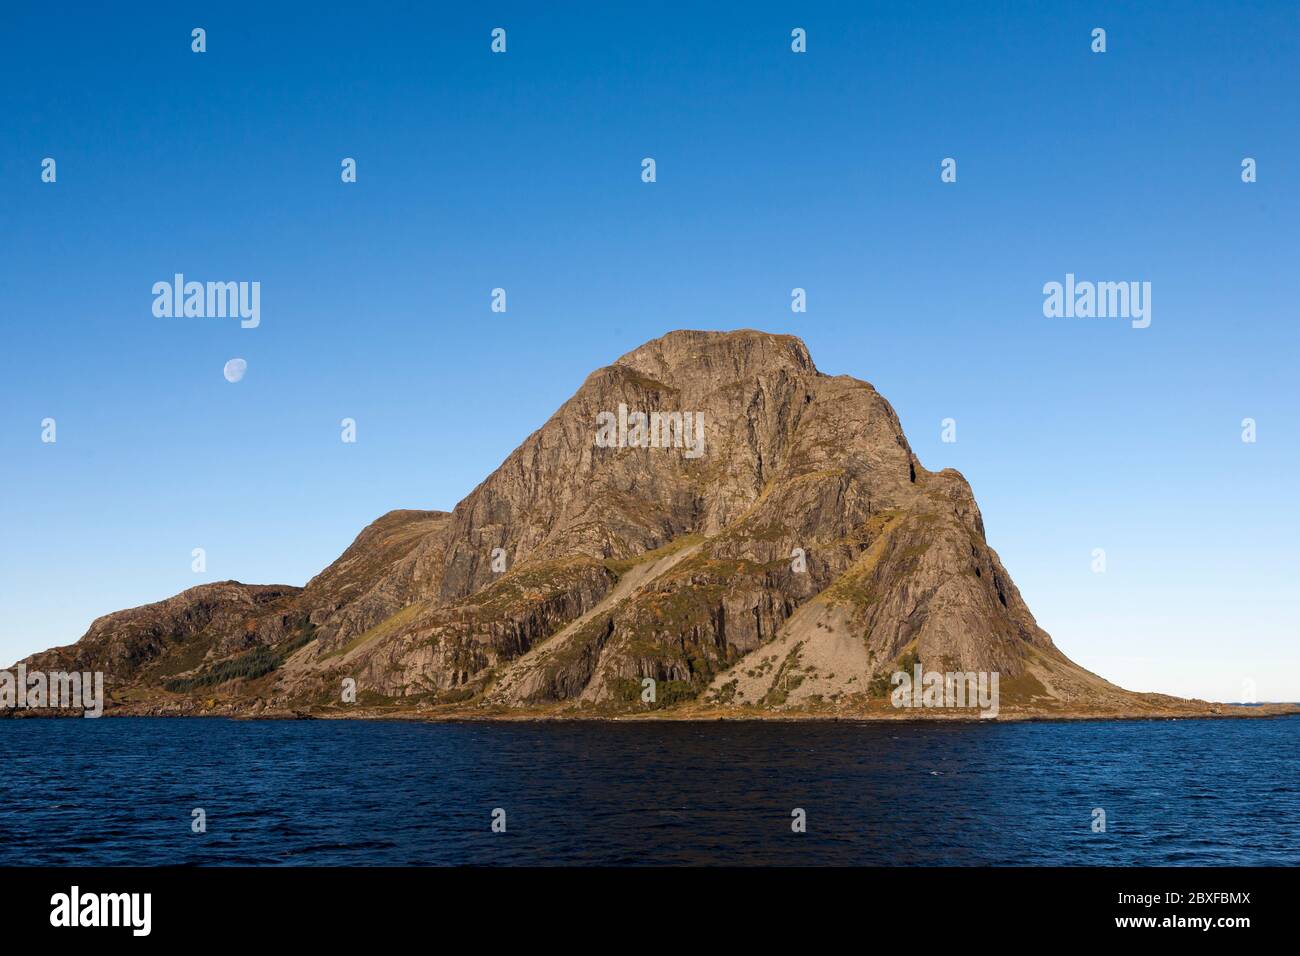 The famous mountain of Norskehesten dominates the island of Alden, Askvoll, Sogn og Fjordane, Norway Stock Photo